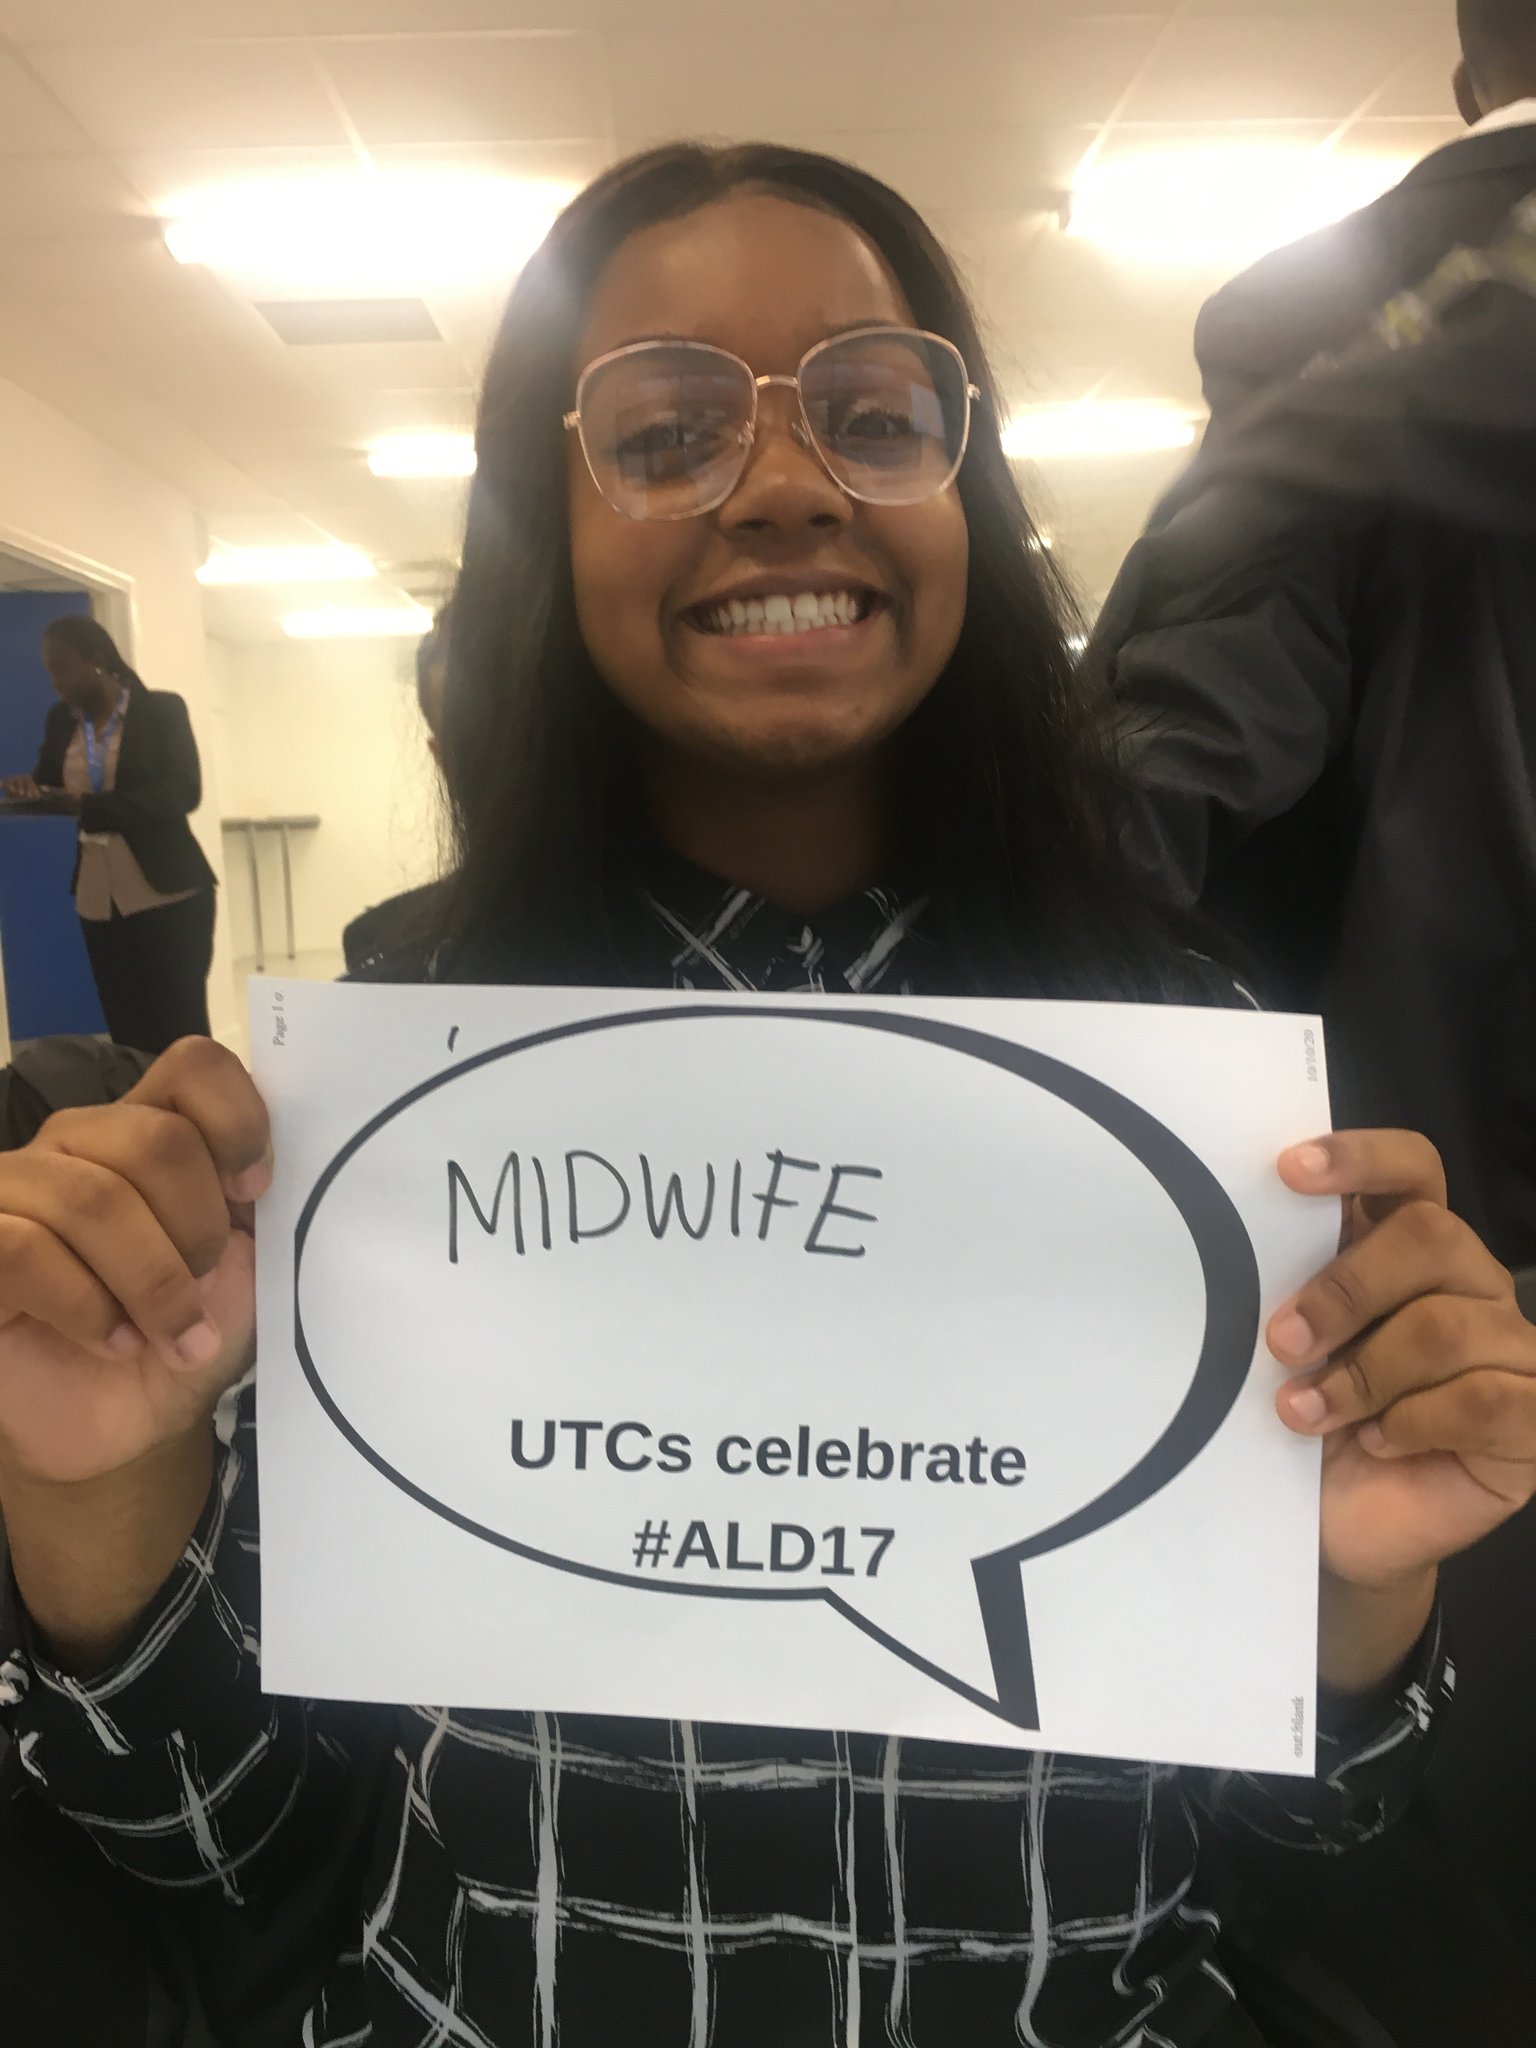 #AdaLovelaceDay #ALD17 @FindingAda Shanyle is on her journey to becoming a midwife studying GCSE Science and Level 2 engineering #ThinkUTC https://t.co/gf0OqvHdbb